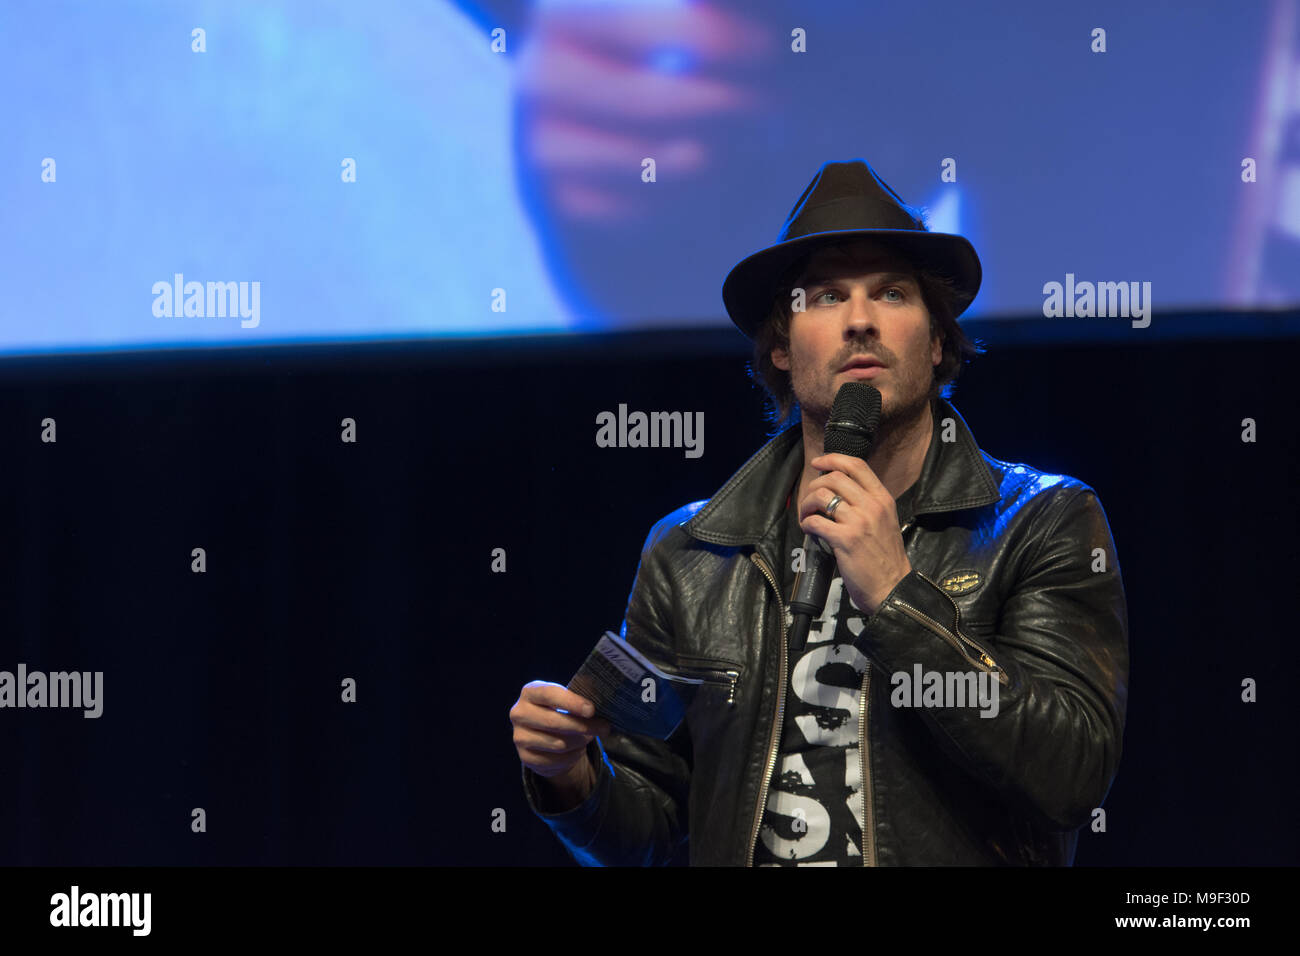 Bonn, Germany, 24 Mar 2018. Actor Ian Somerhalder (The Vampire Diaries, LOST, Smallville), panel, at MagicCon, a three-day (March 23-25 2018) fantasy & mystery fan convention. Credit: Markus Wissmann/Alamy Live News Stock Photo